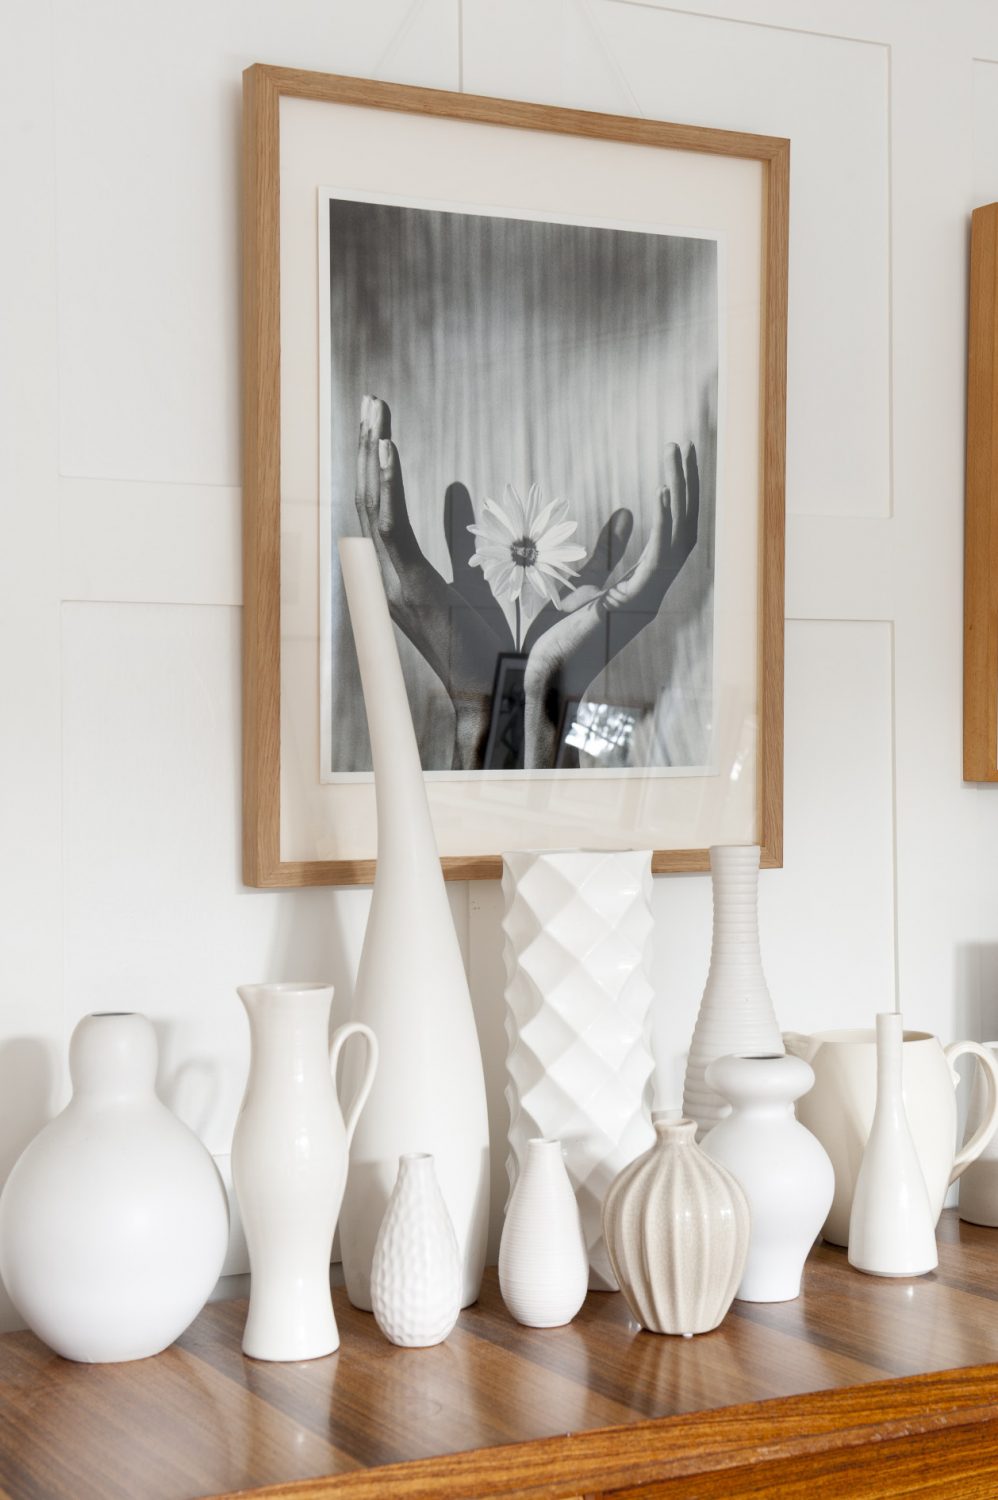 A collection of white vases